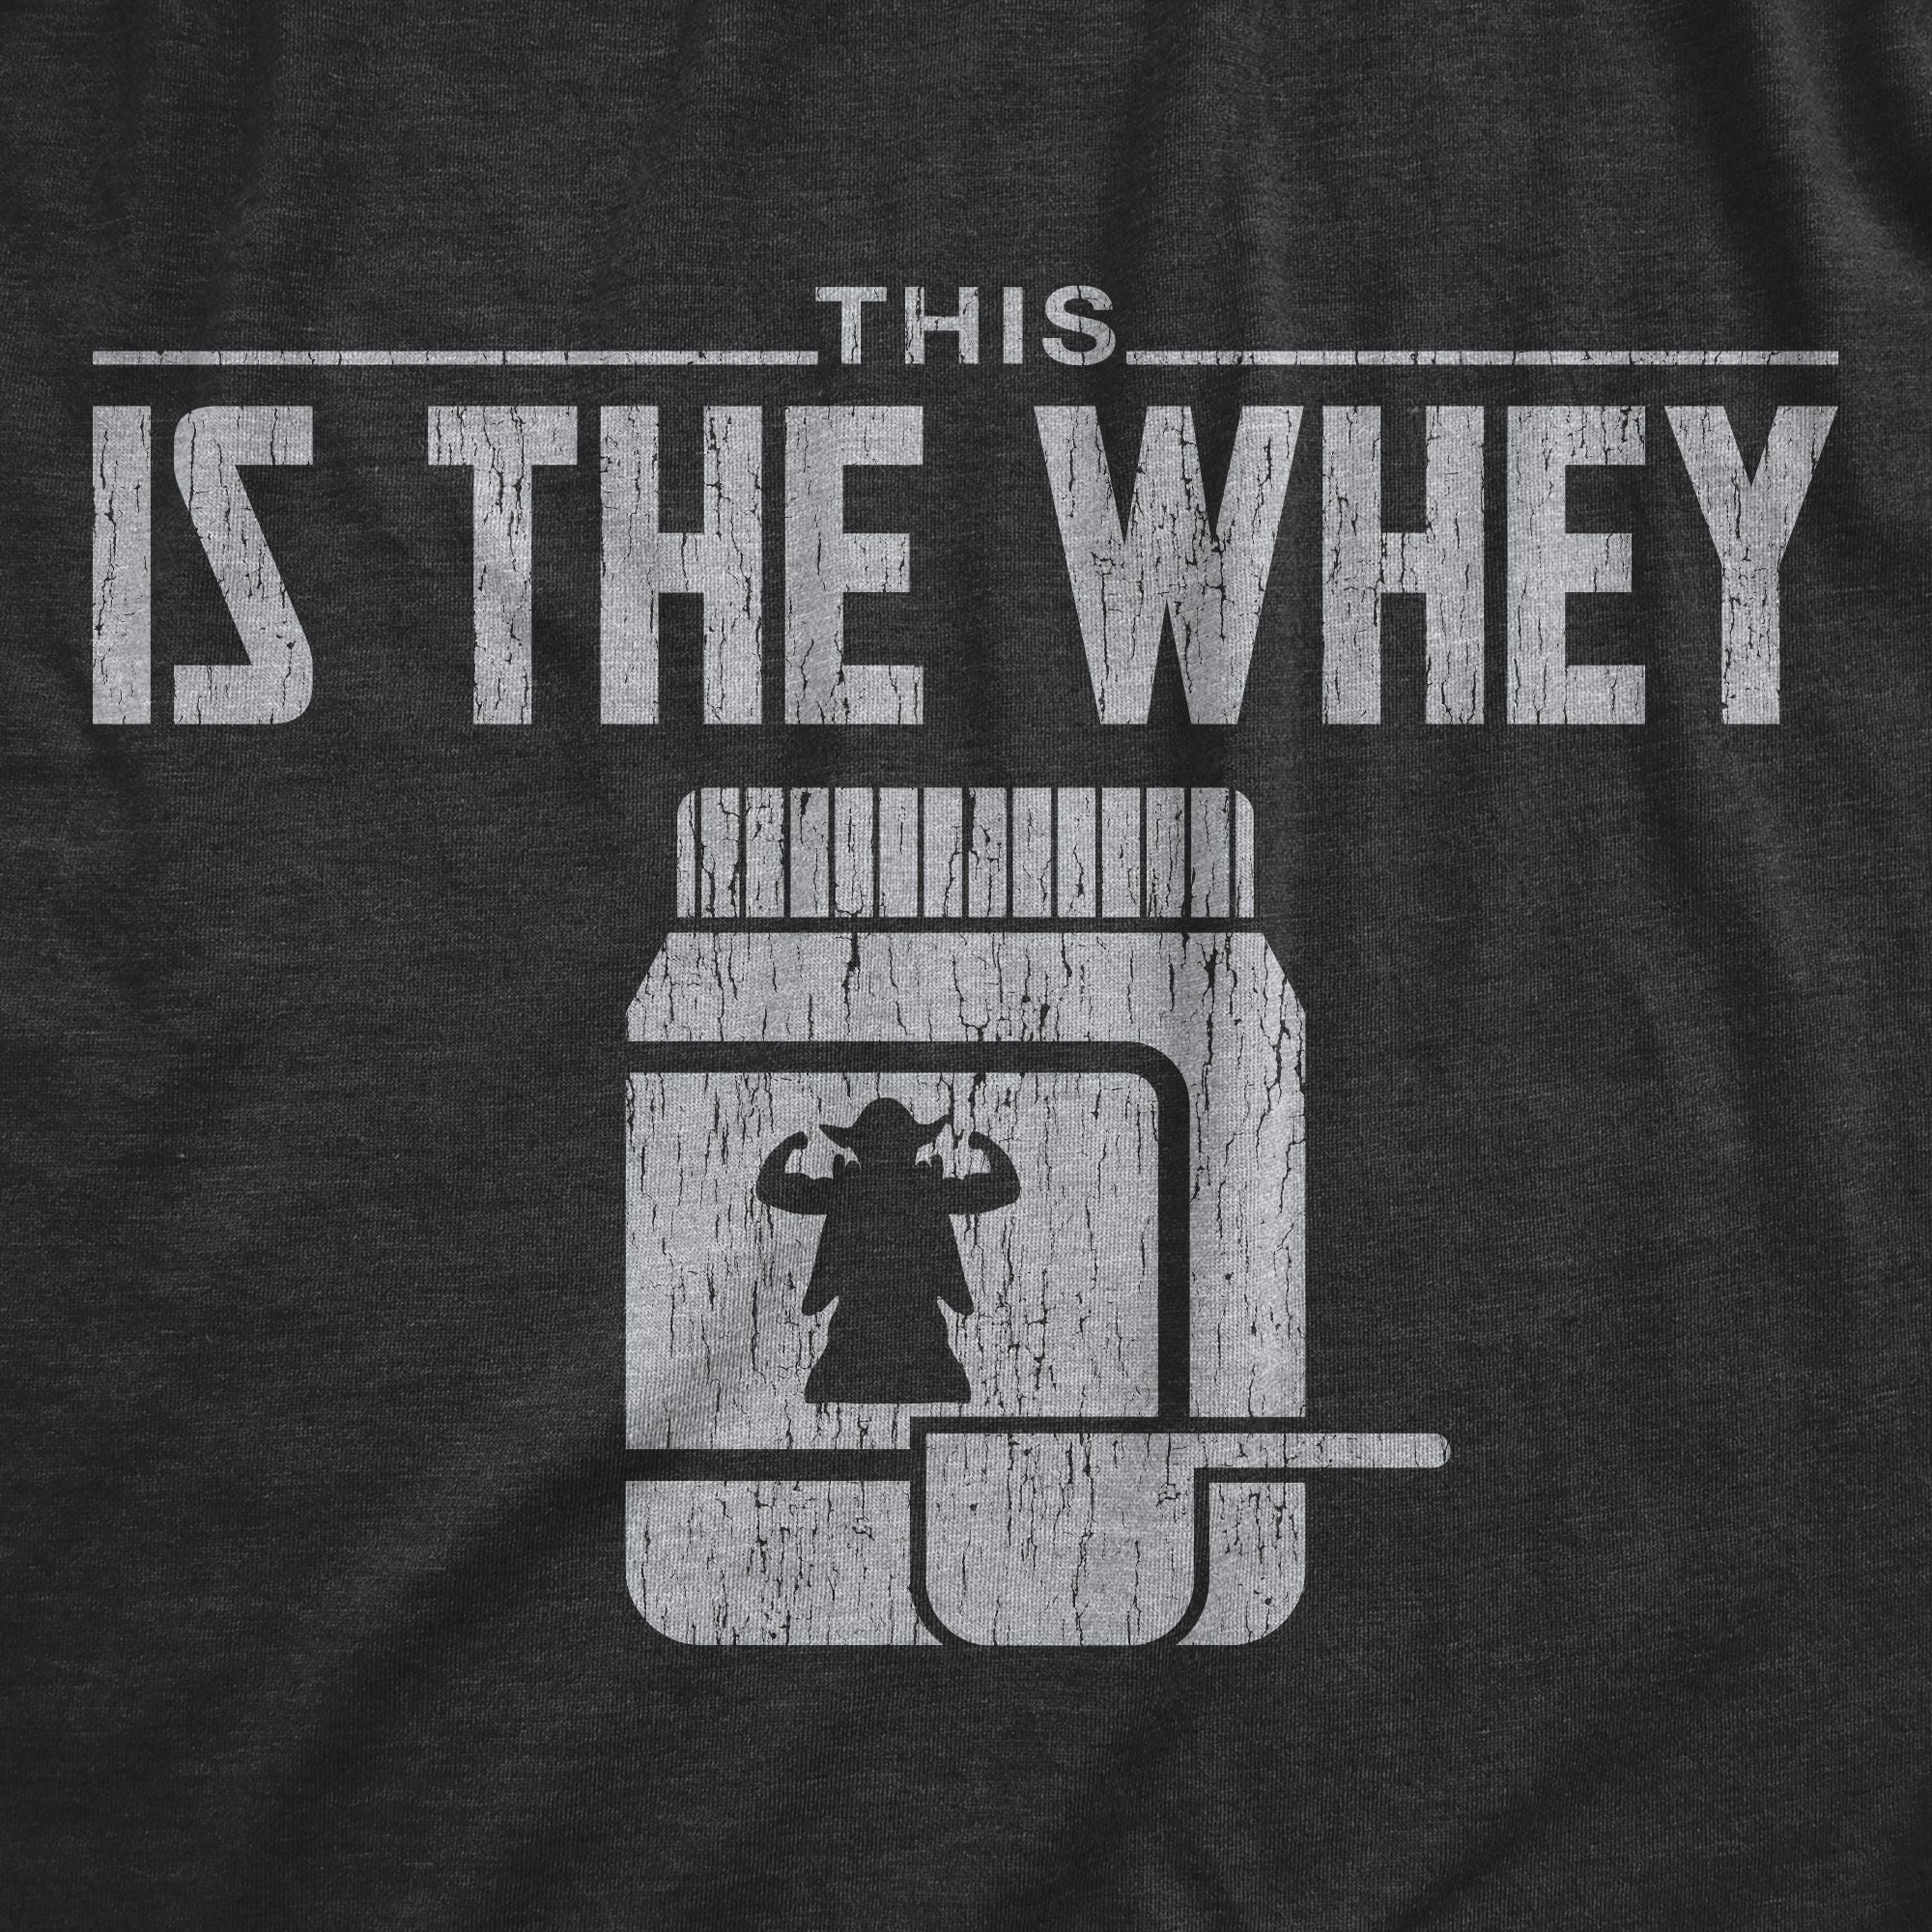 Funny Heather Black This Is The Whey Mens T Shirt Nerdy Fitness TV & Movies Tee